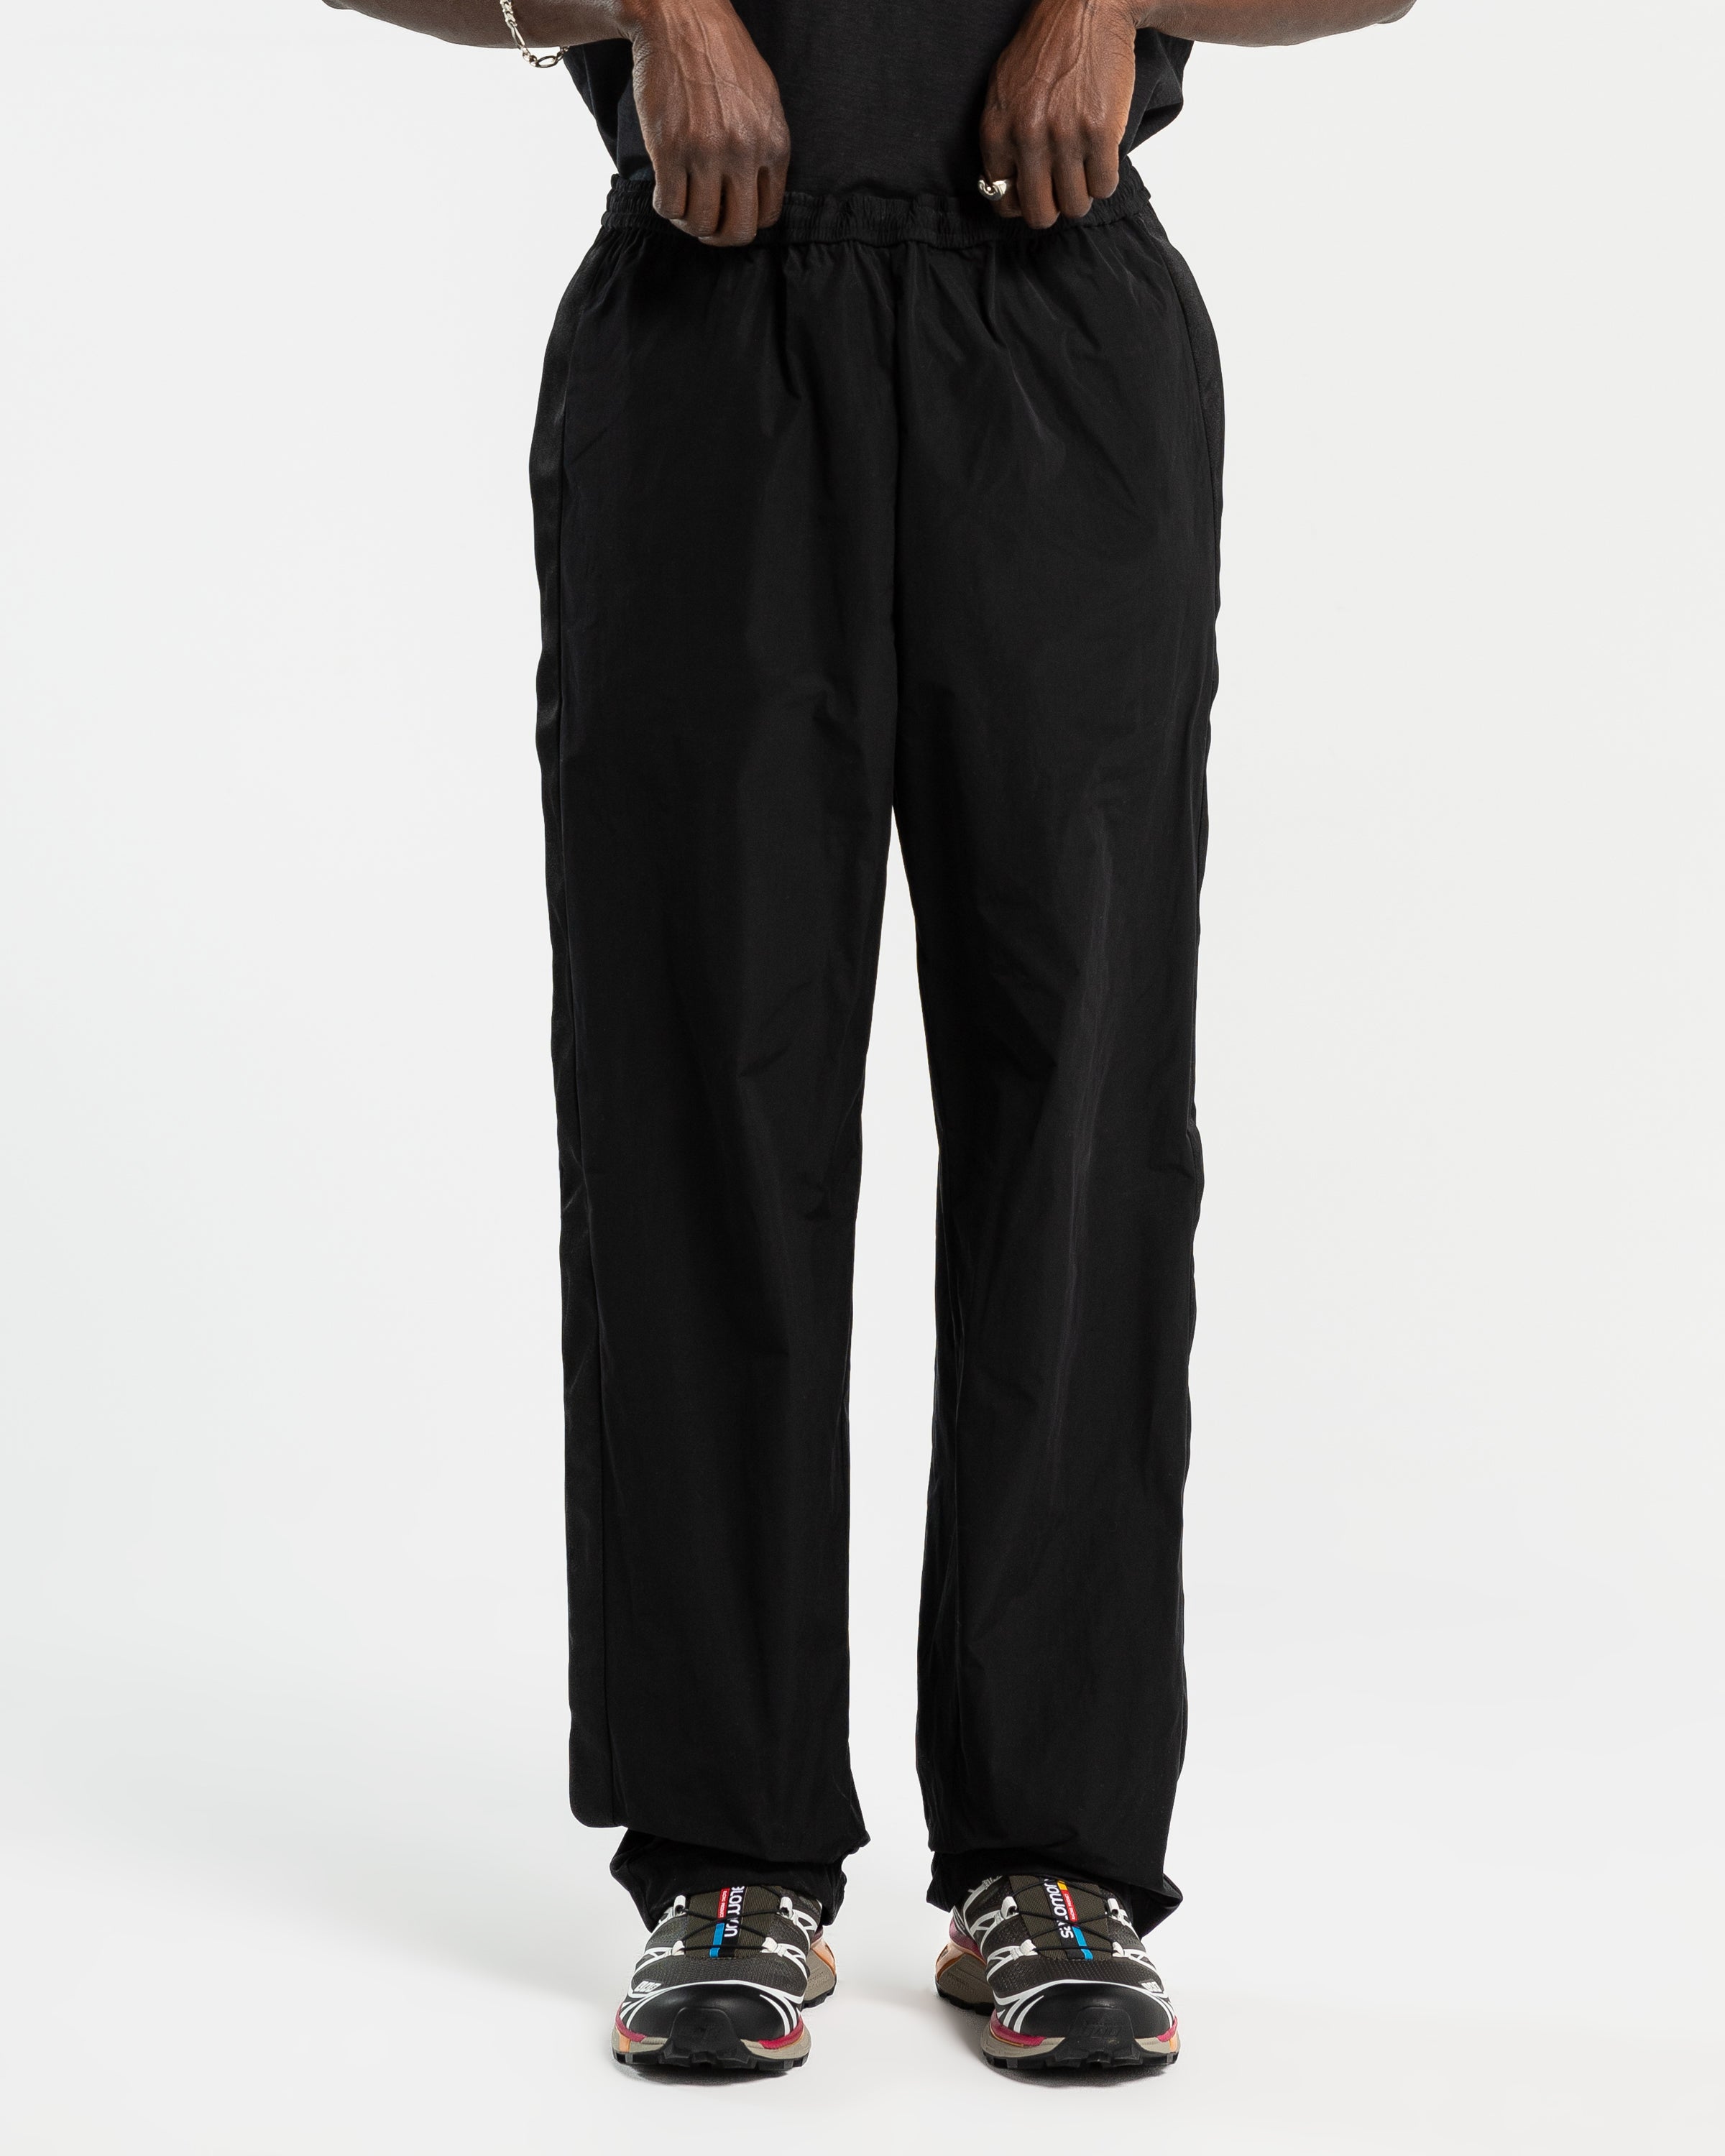 Relaxed Fit Trouser in Black